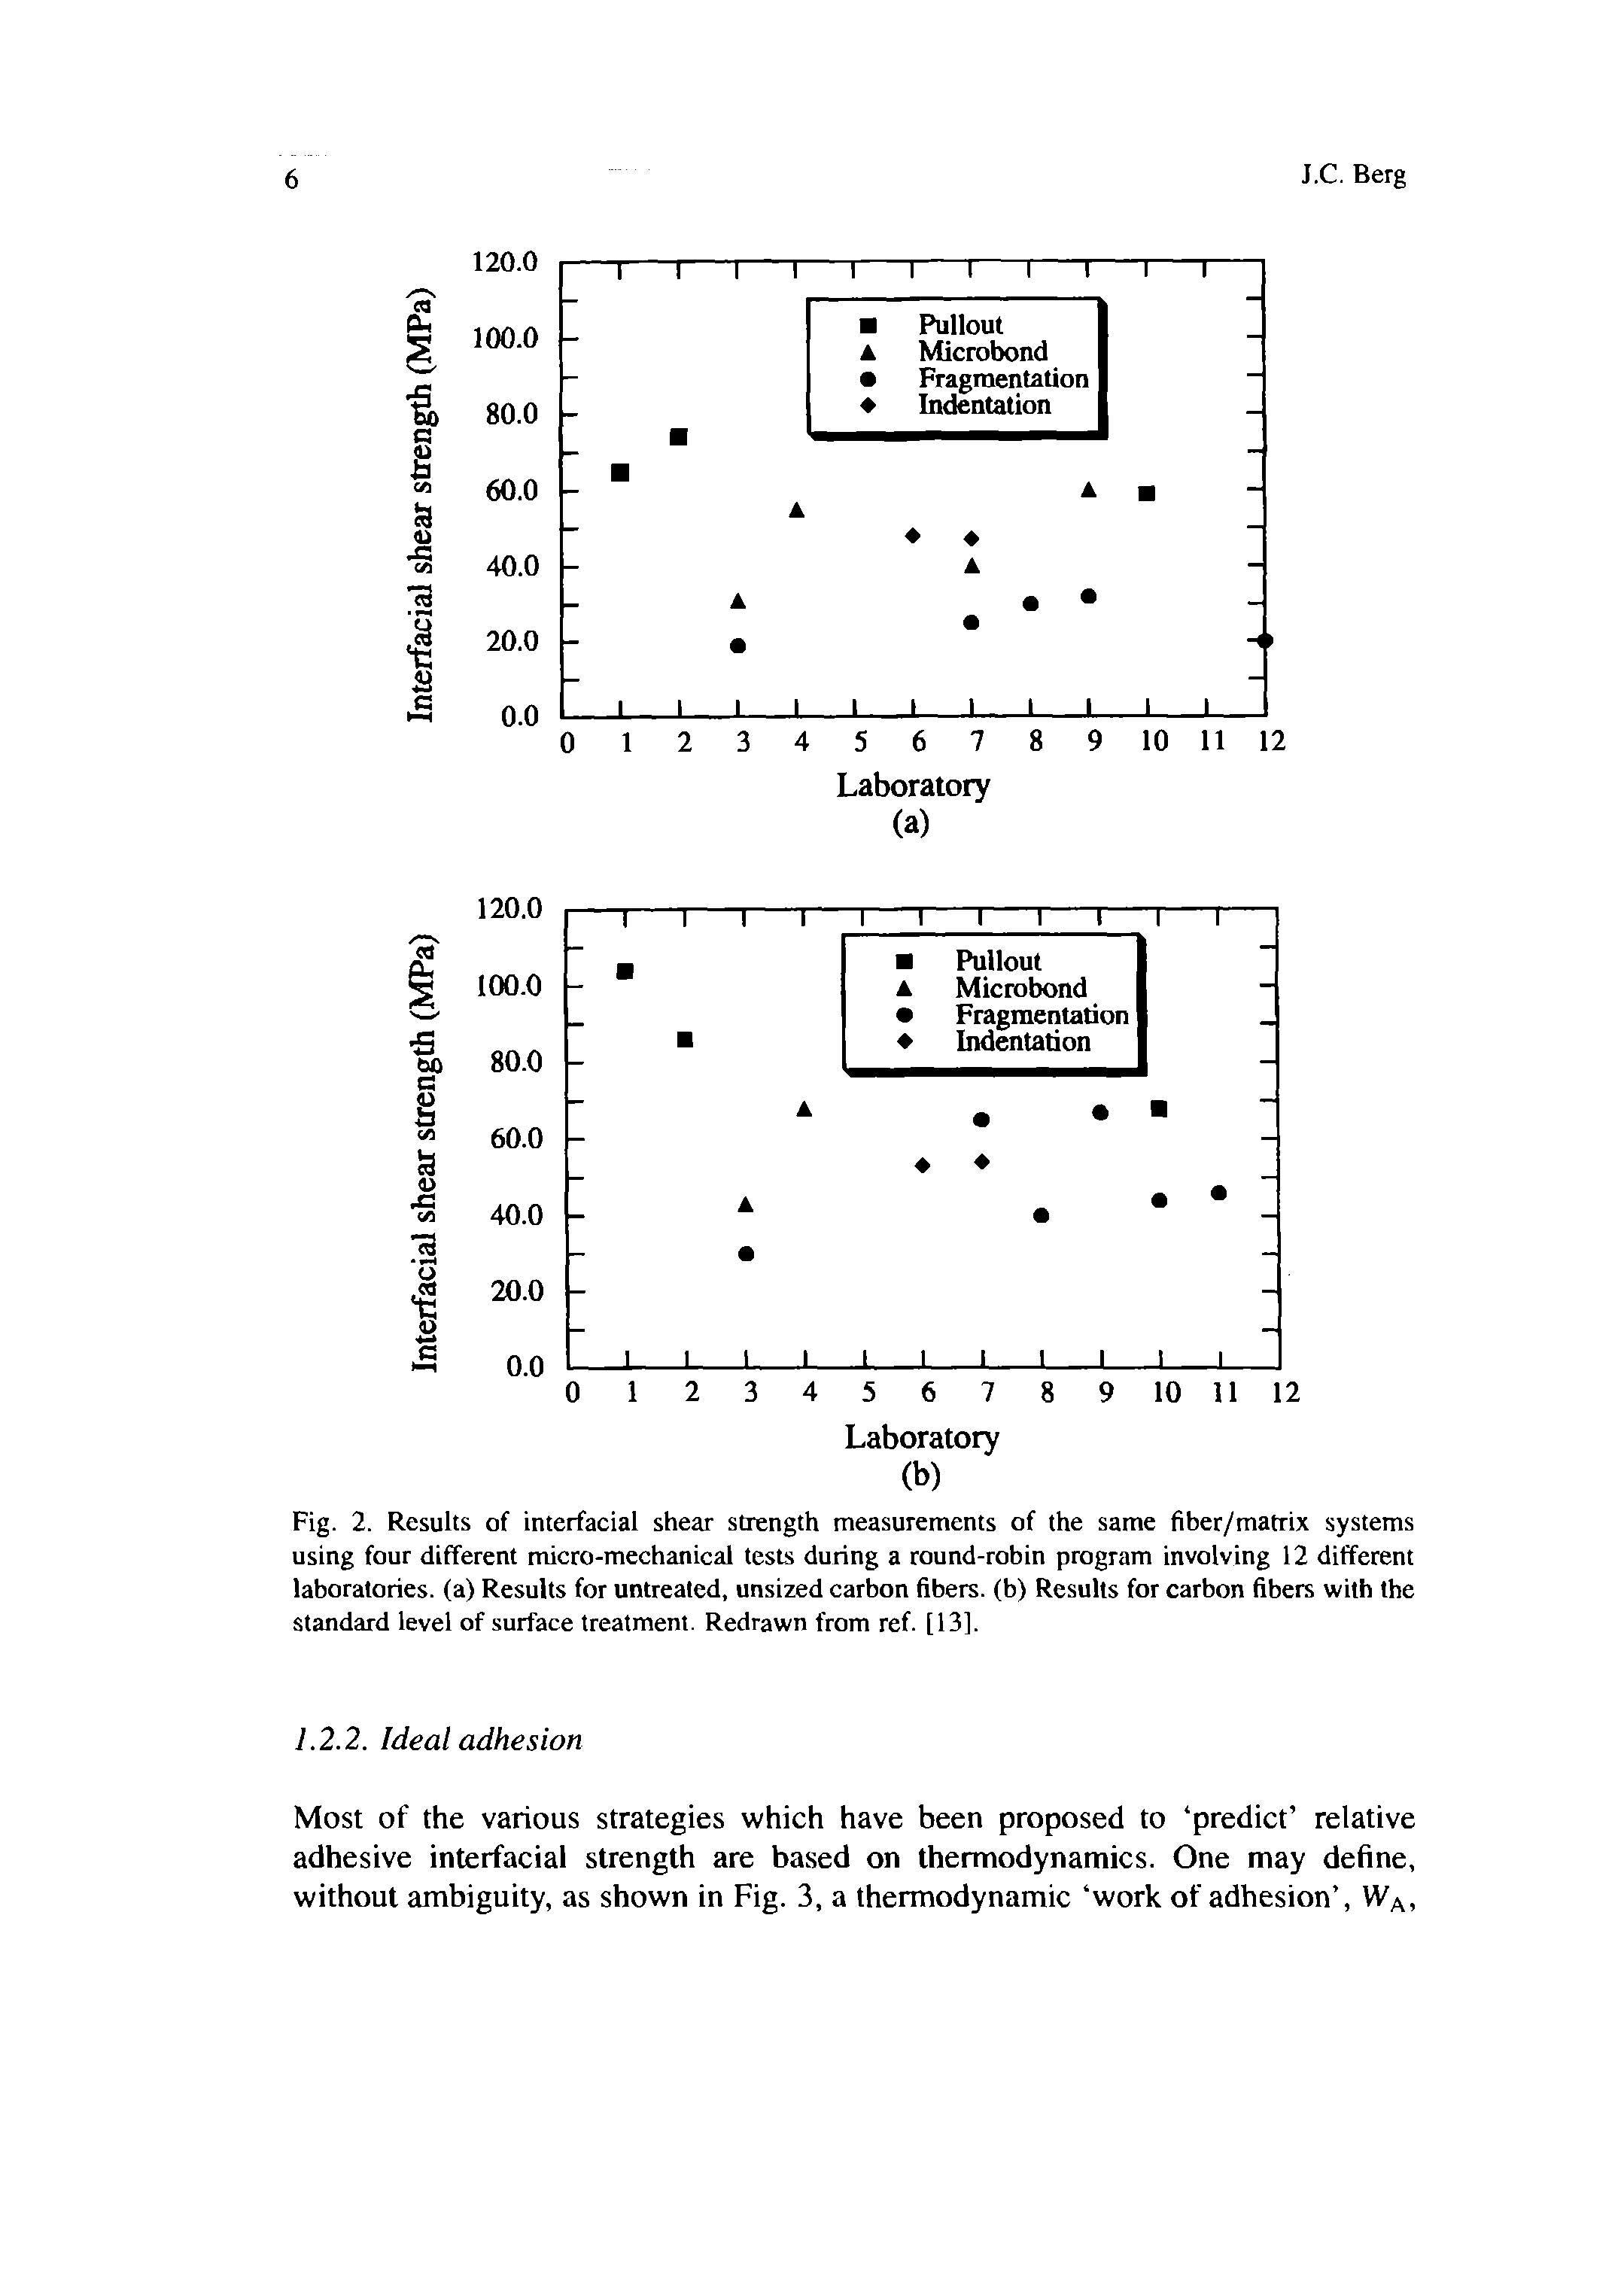 Fig. 2. Results of interfacial shear strength measurements of the same fiber/matrix systems using four different micro-mechanical tests during a round-robin program involving 12 different laboratories, (a) Results for untreated, unsized carbon fibers, (b) Results for carbon fibers with the standard level of surface treatment. Redrawn from ref. [13].